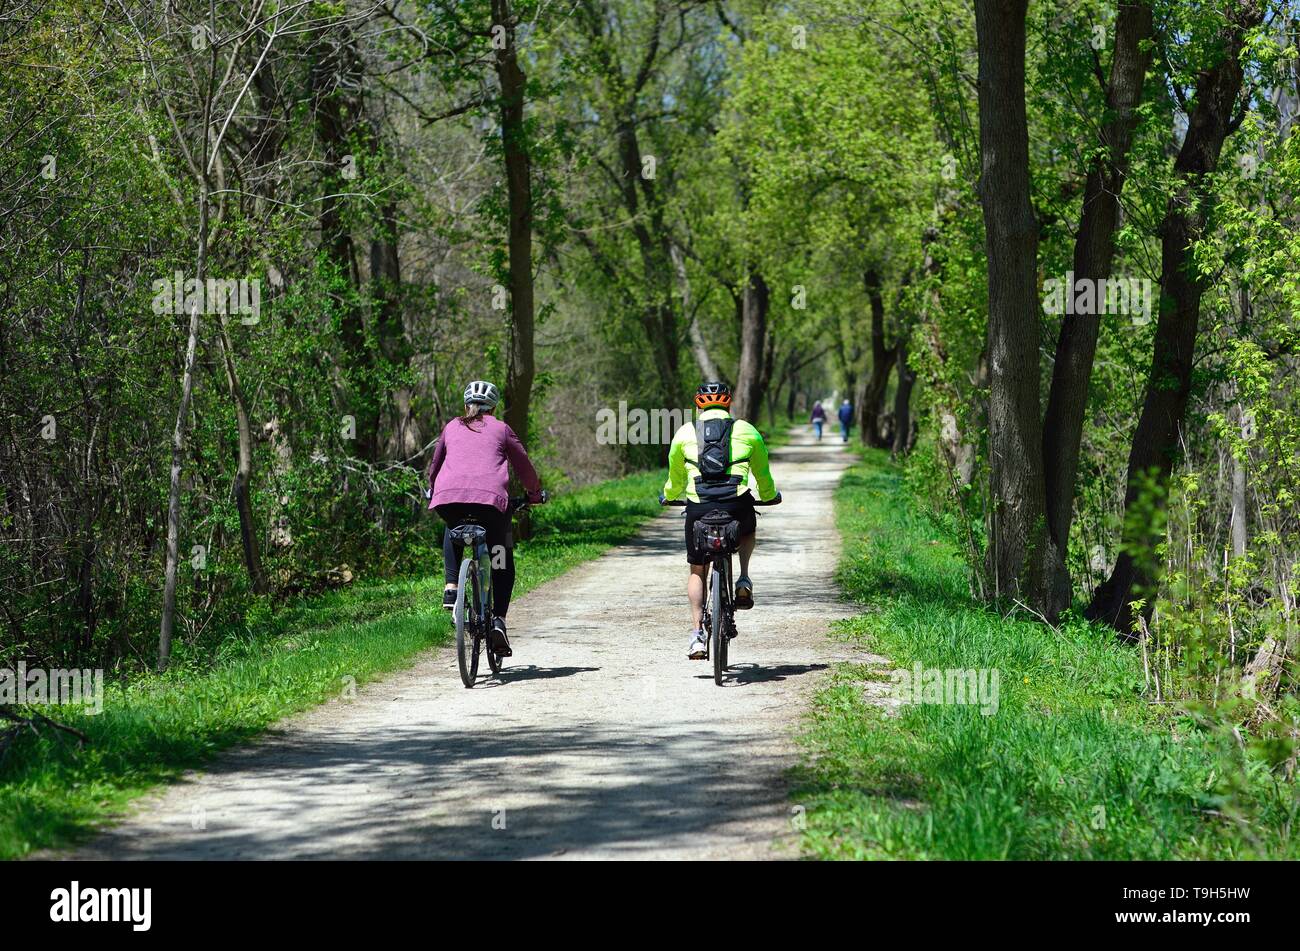 Wayne, Illinois, USA. Couple enjoying a bike ride on a rural path within a forest preserve. Stock Photo